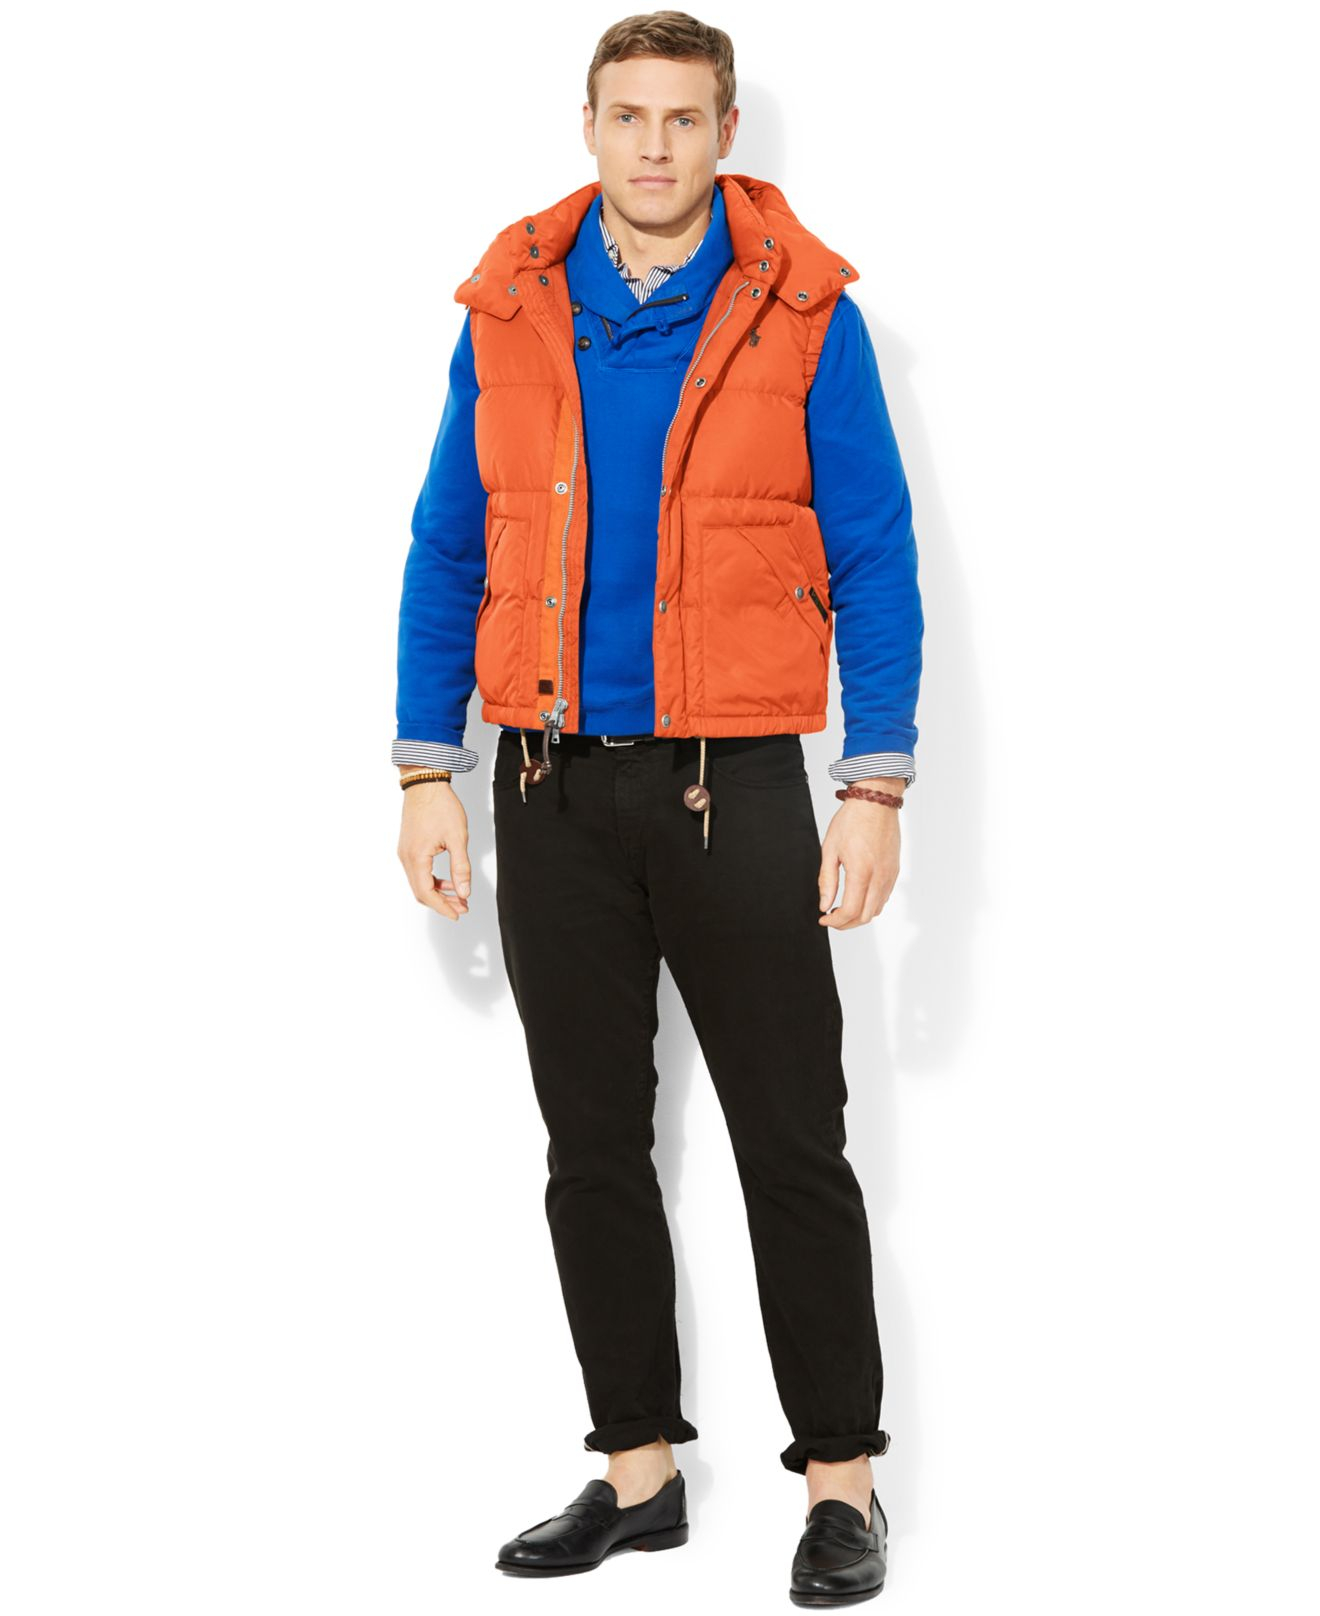 Lyst - Polo Ralph Lauren Big And Tall Elmwood Down Puffer Vest in ...